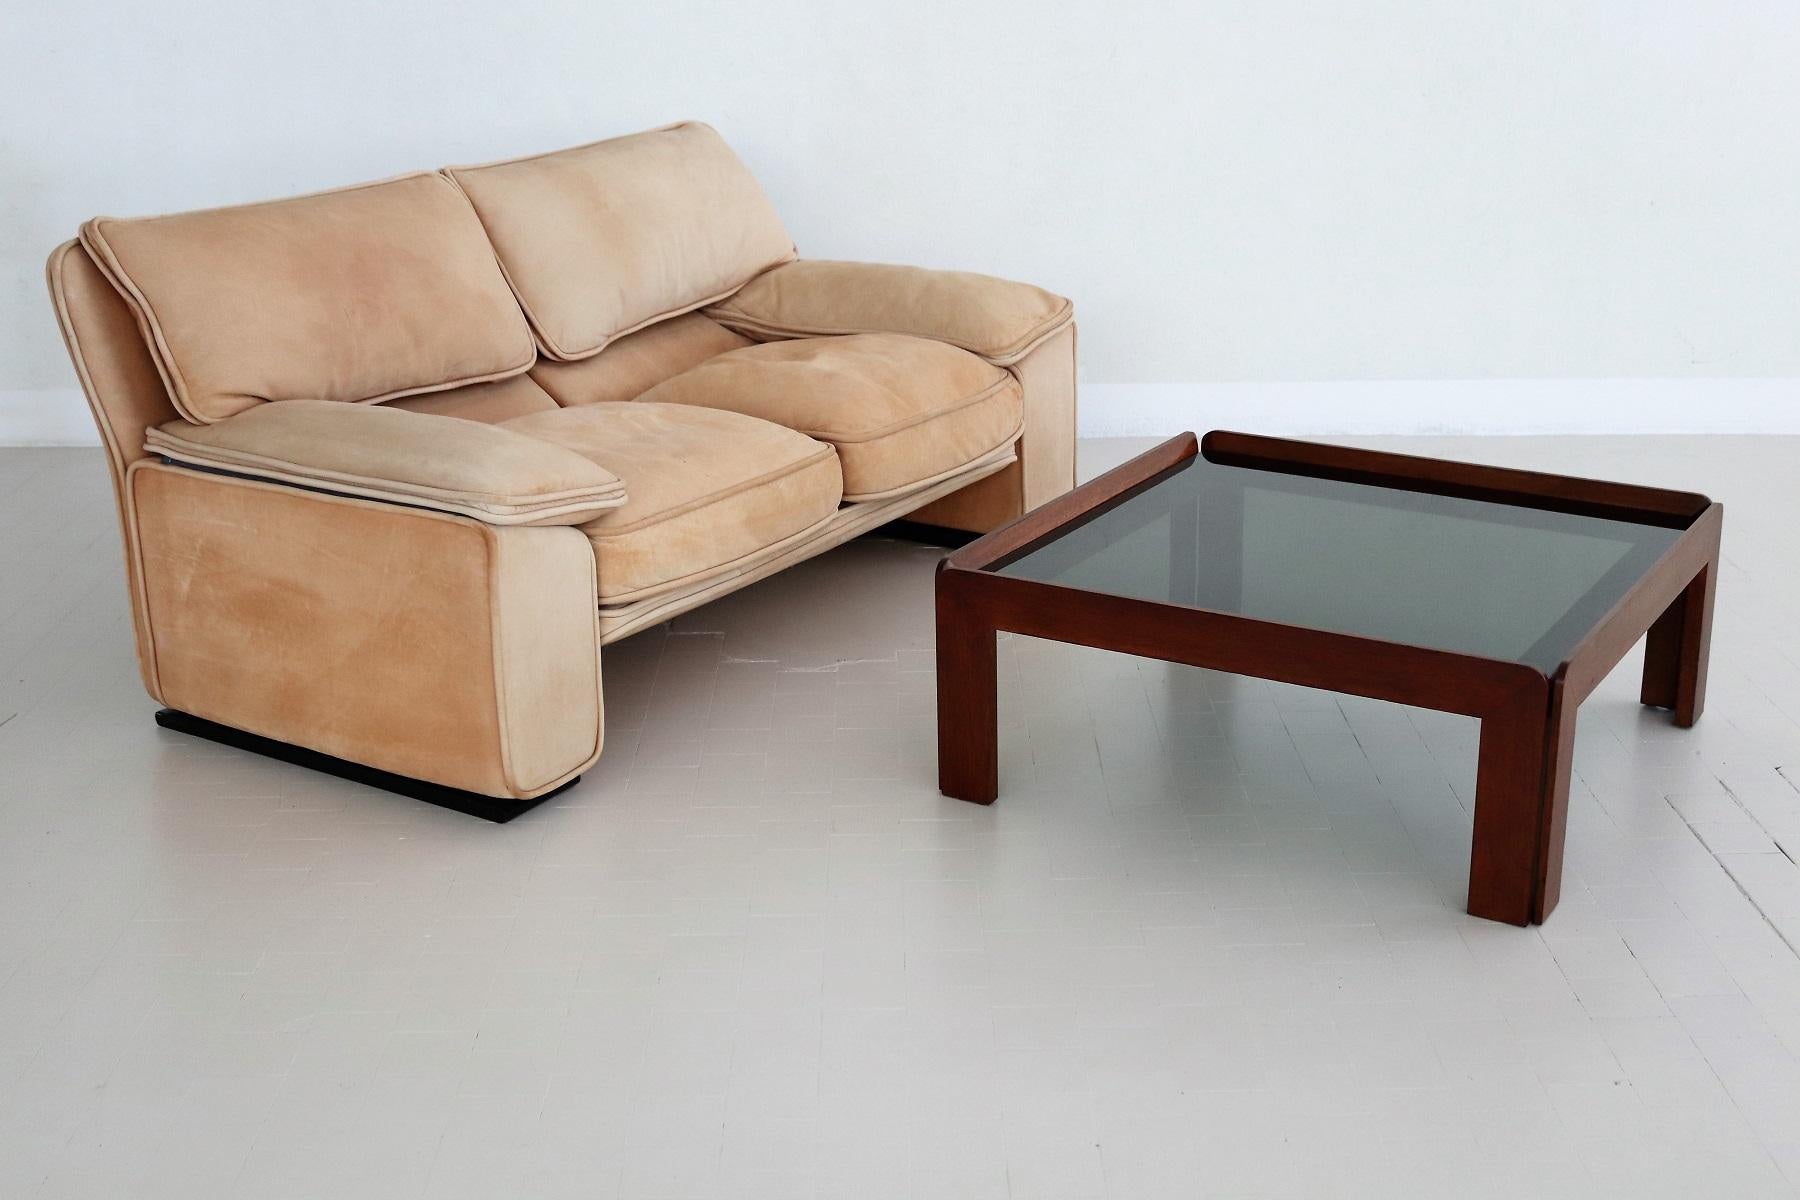 Italian Midcentury Square Coffee Table in Beechwood and Smoked Glass, 1960s For Sale 9